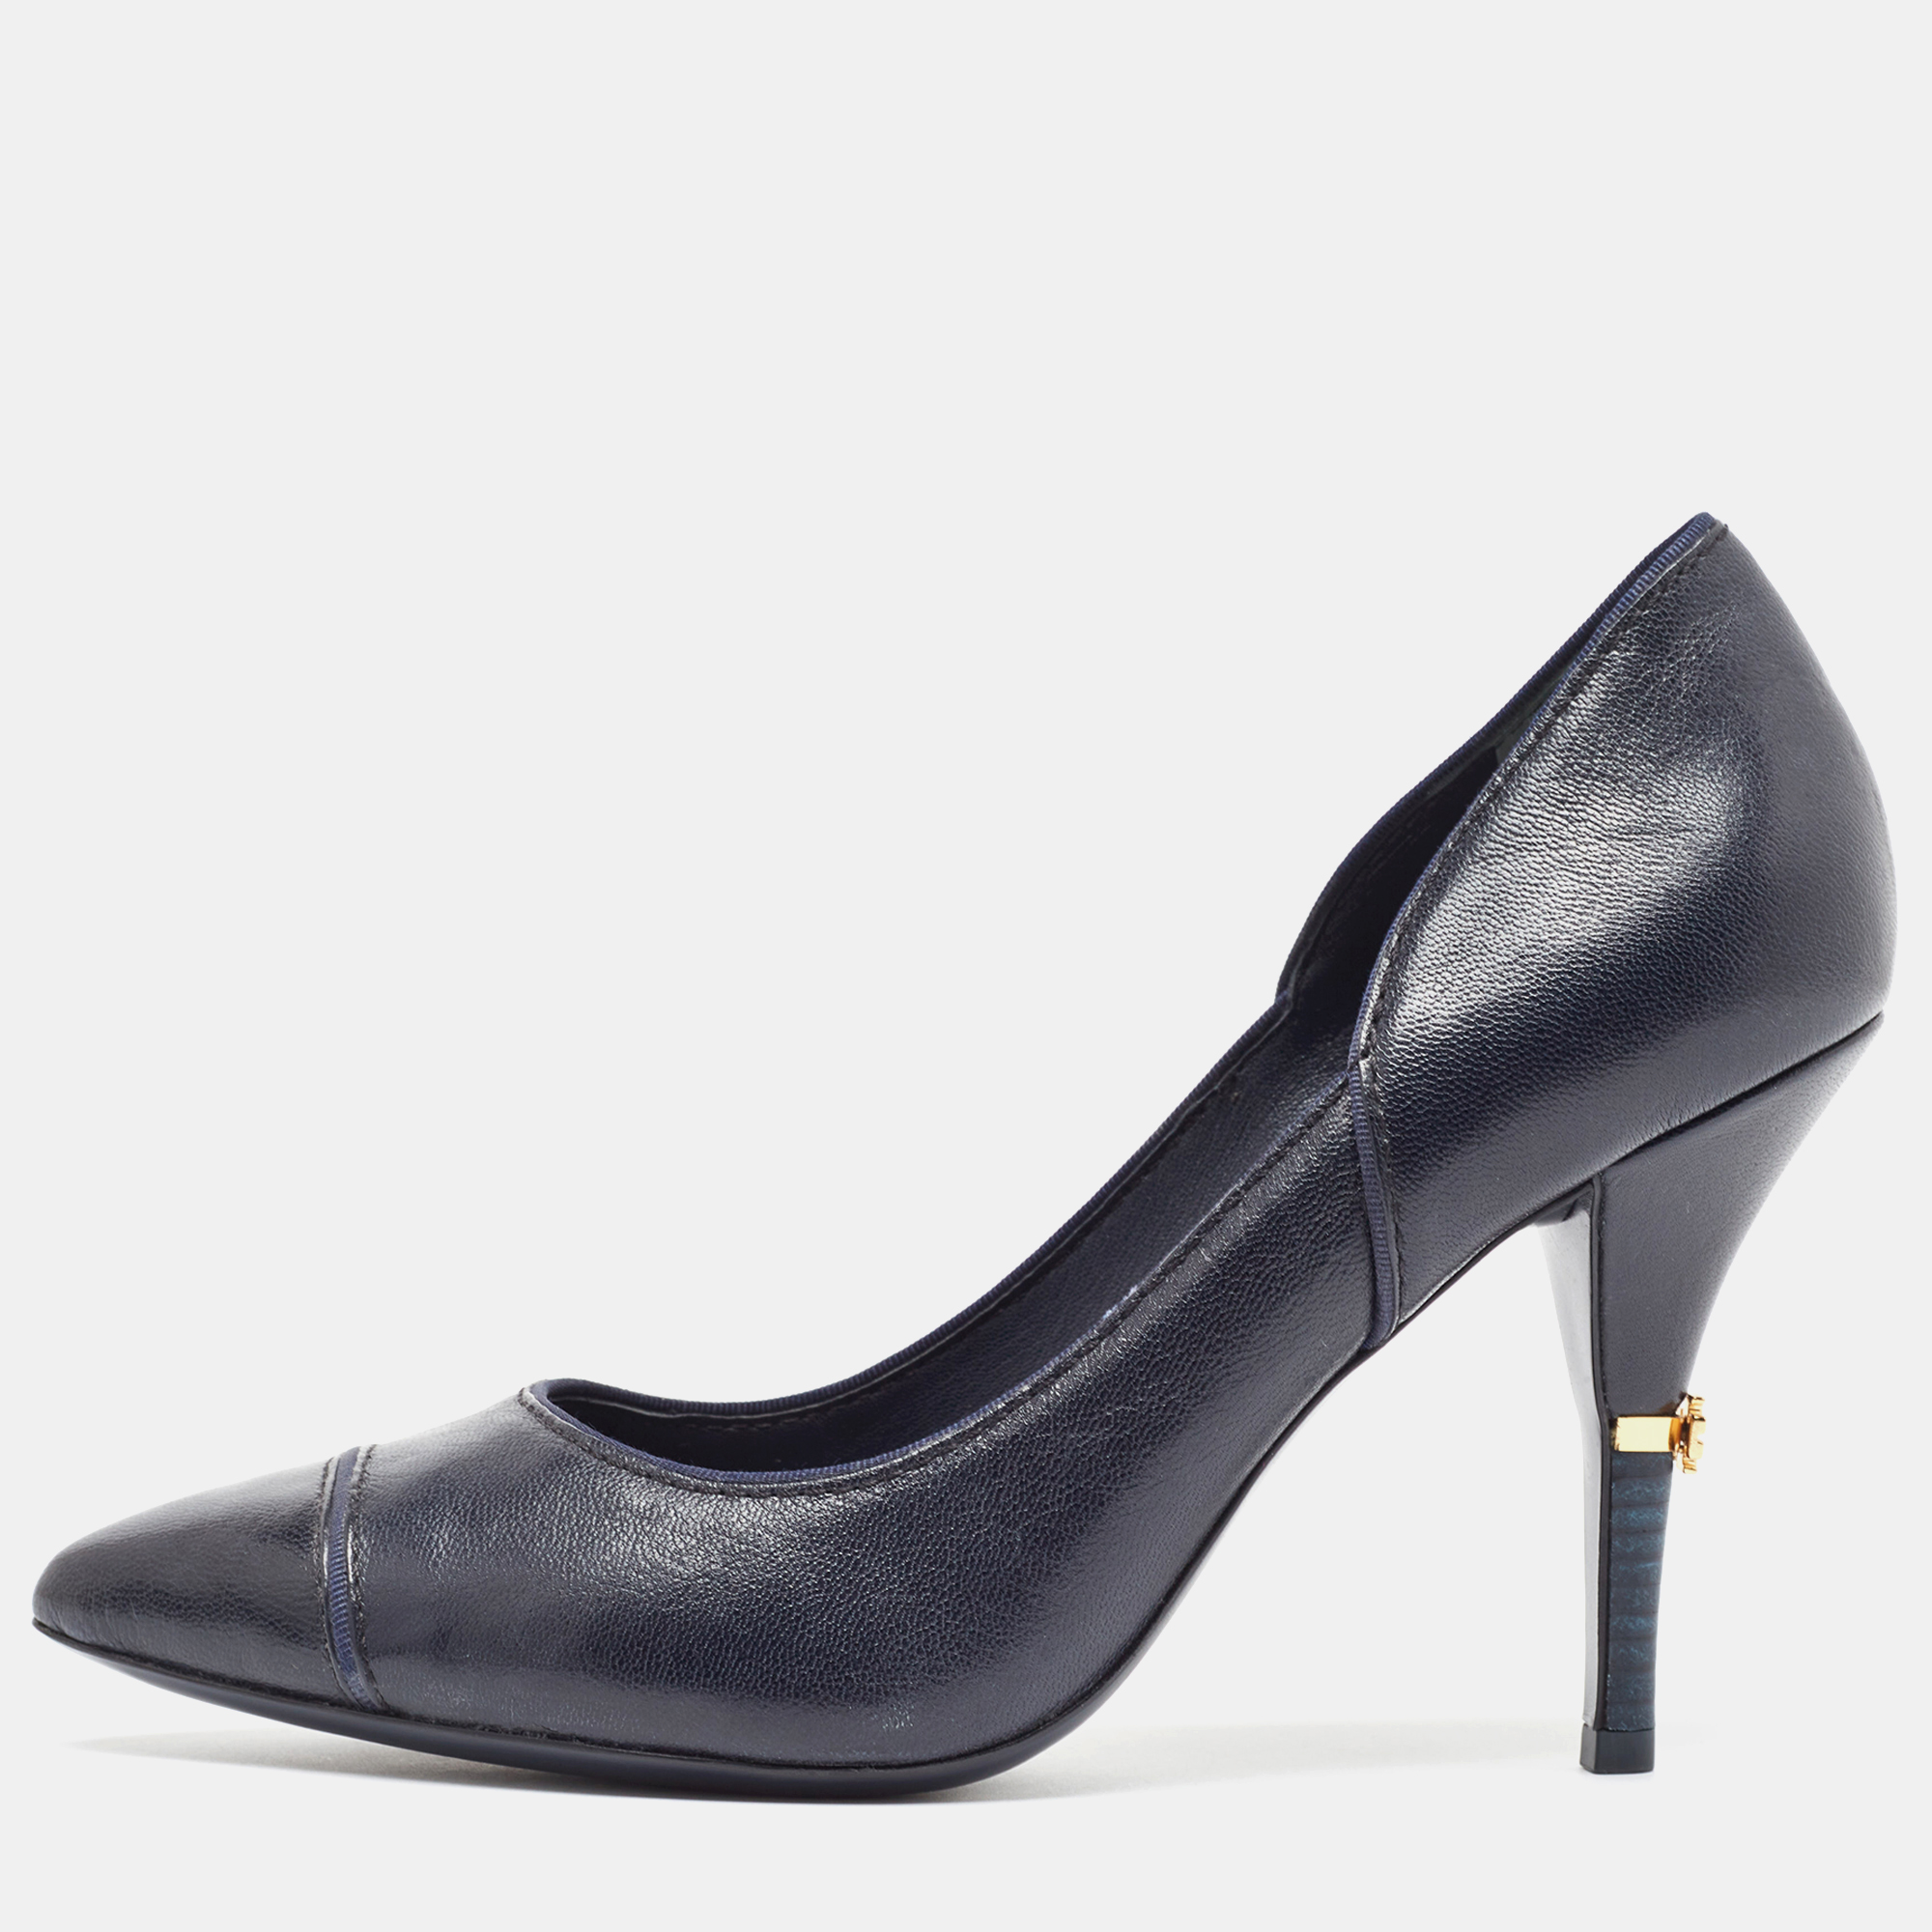 Tory burch navy blue pointed toe pumps size 40.5